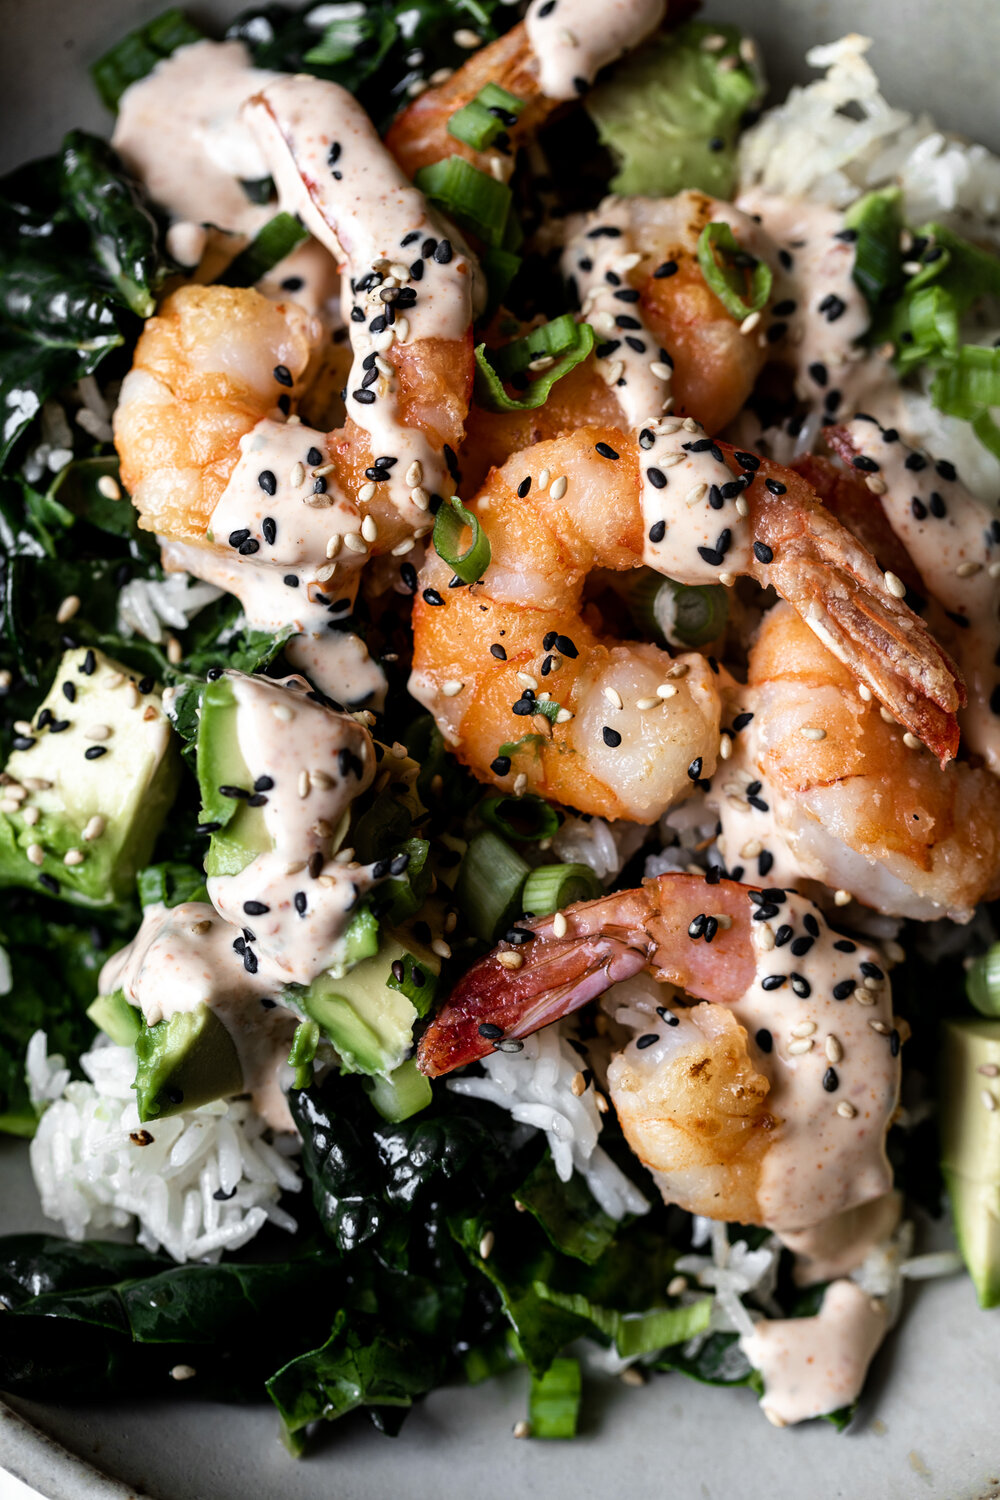 Healthy-ish shrimp bowls with crispy shrimp avocado and green onion over crispy rice and kale topped with a spicy togarashi mayo sauce.